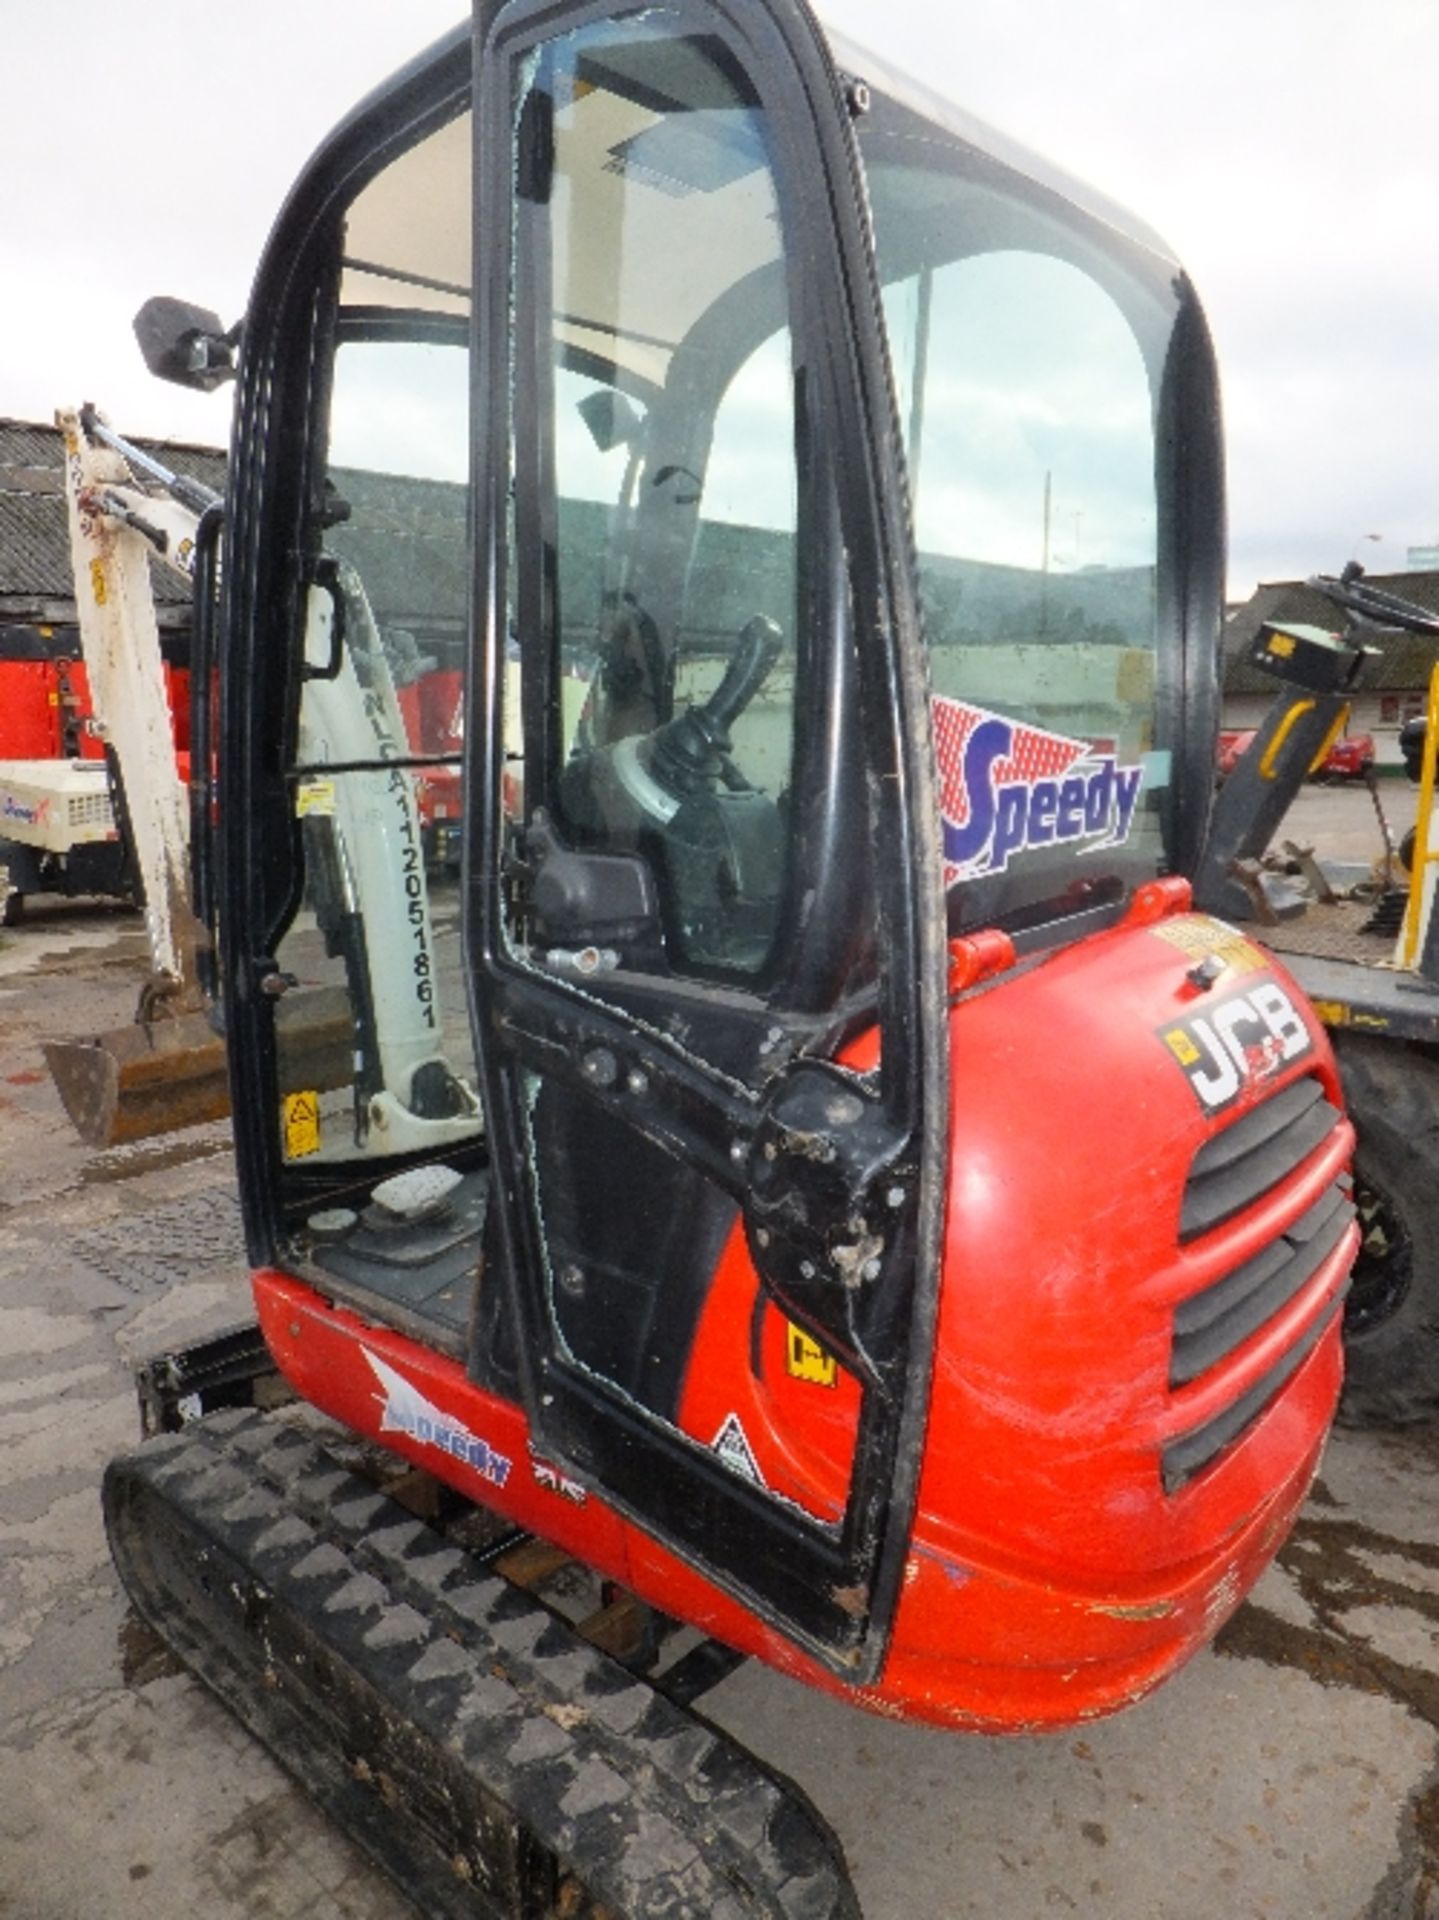 JCB 801.8 CTS mini digger (2011) 941 hrs WLCA112051861 1 bucket, expanding tracks, RDD, coded key - Image 5 of 10